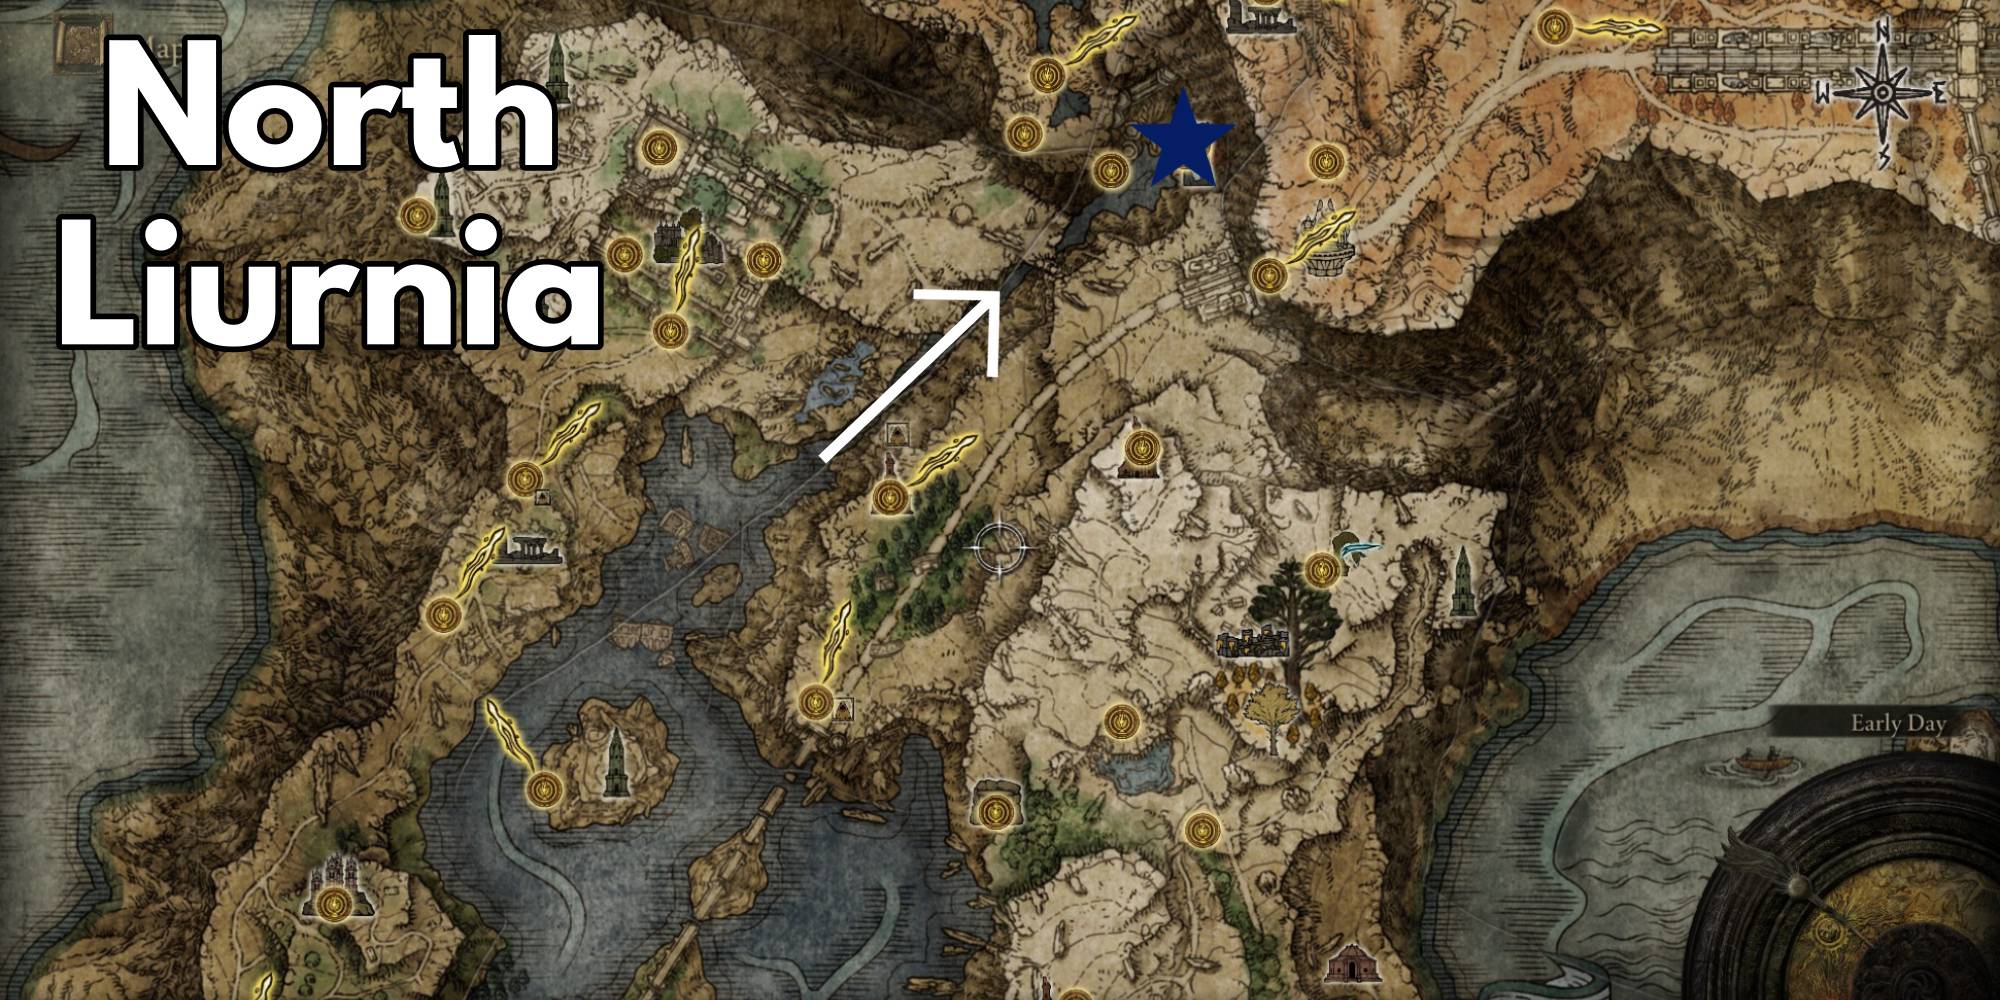 Every Liurnia dungeon location Map and their rewards in Elden Ring